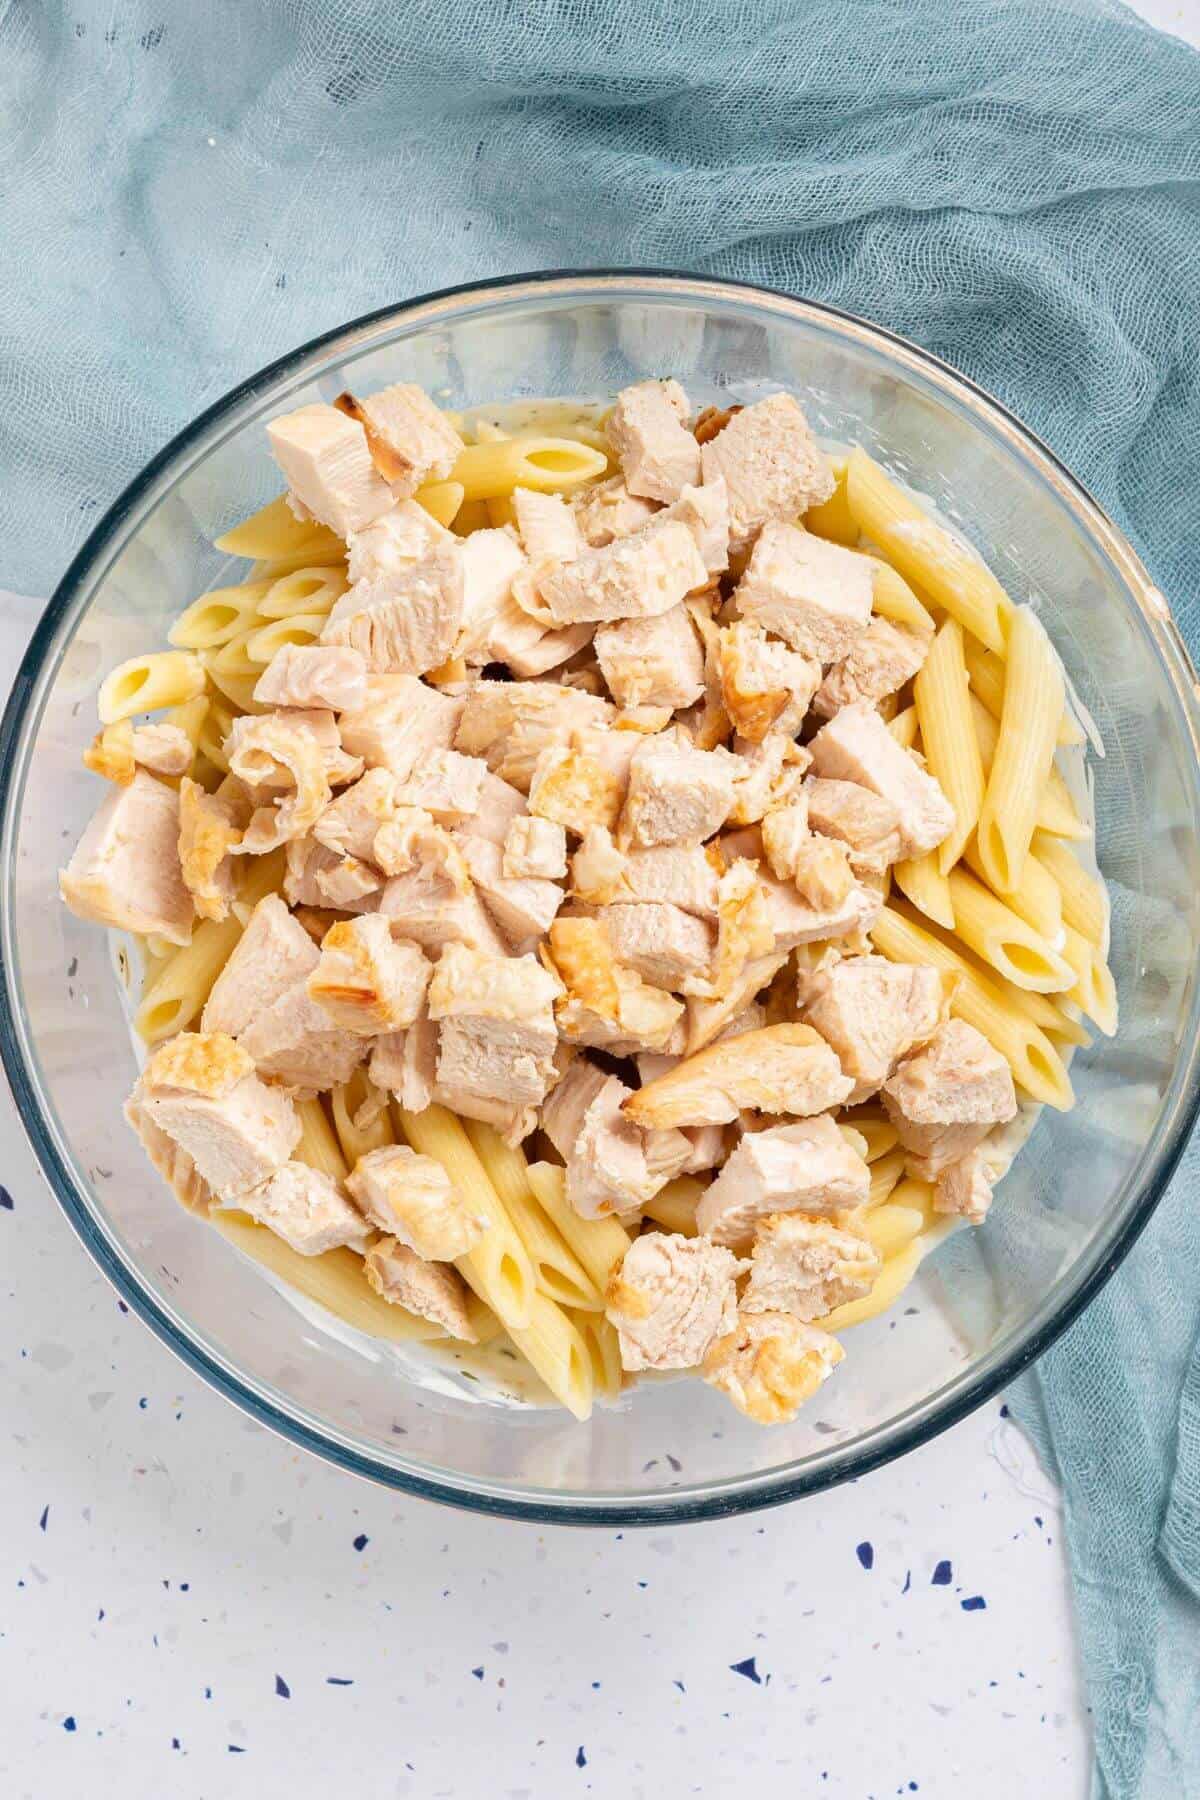 Pasta and chicken added to sauce.